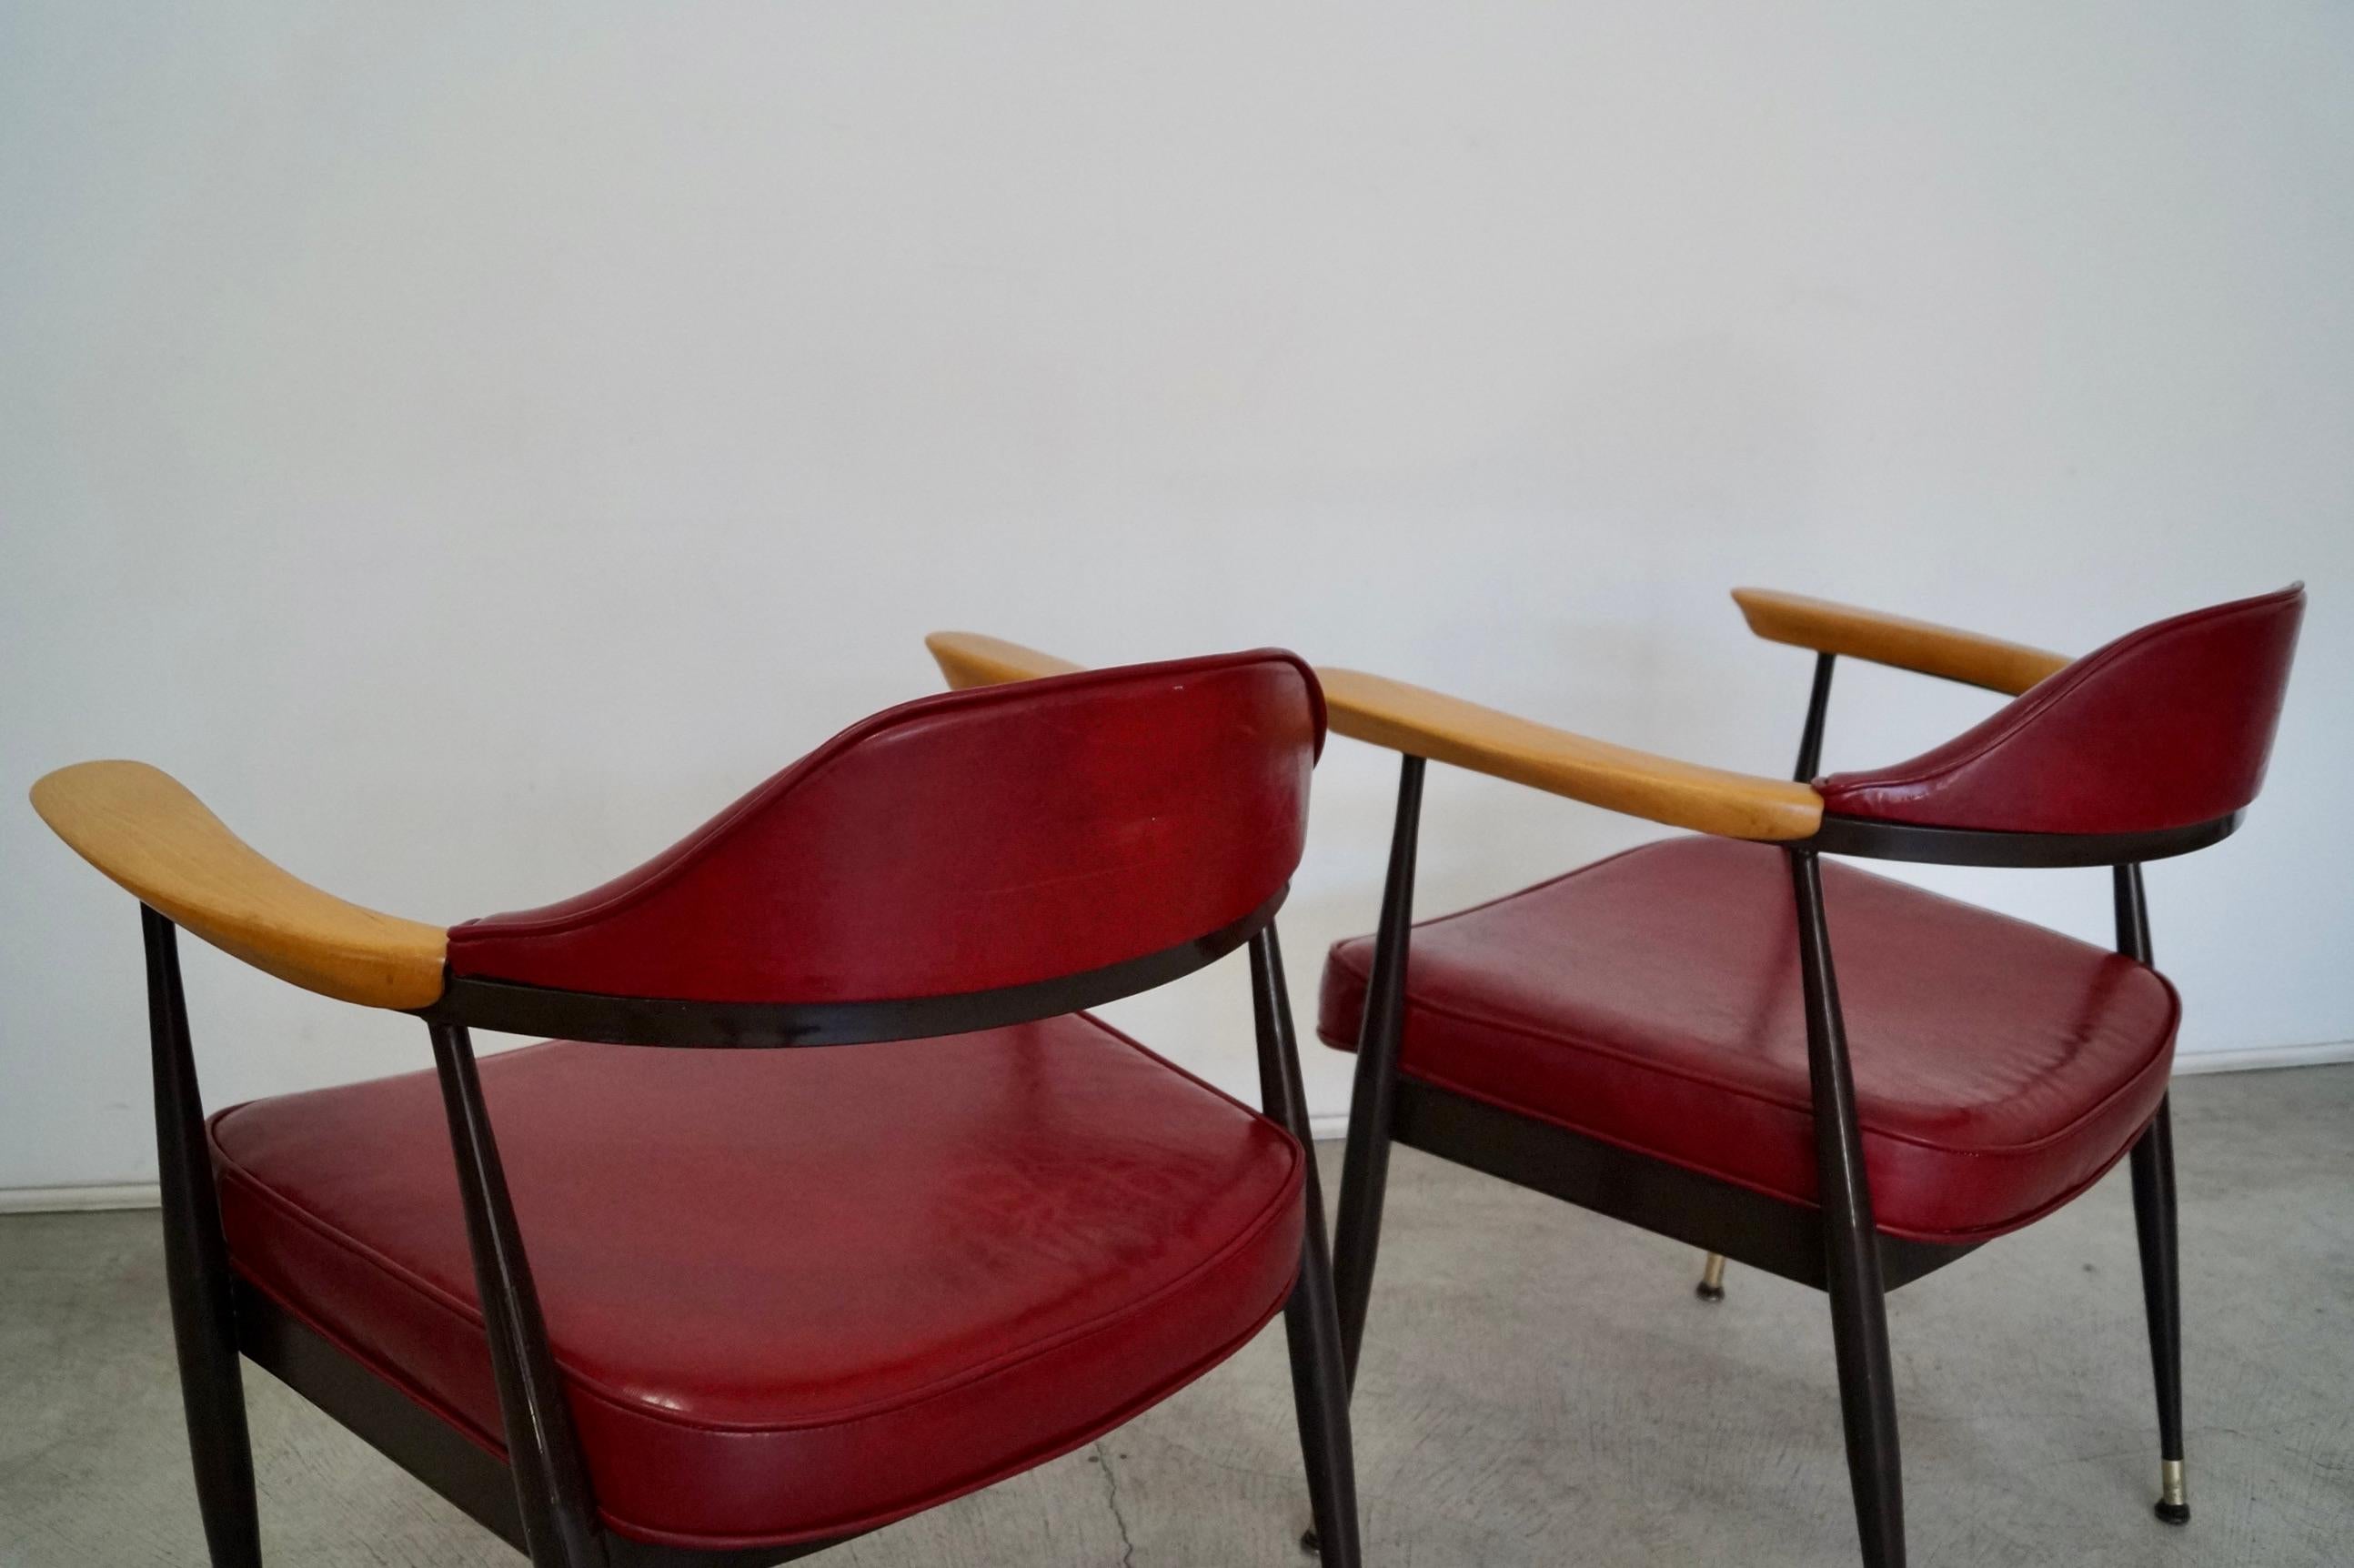 1970's Mid-Century Modern Metal & Wood Armchairs - a Pair For Sale 14